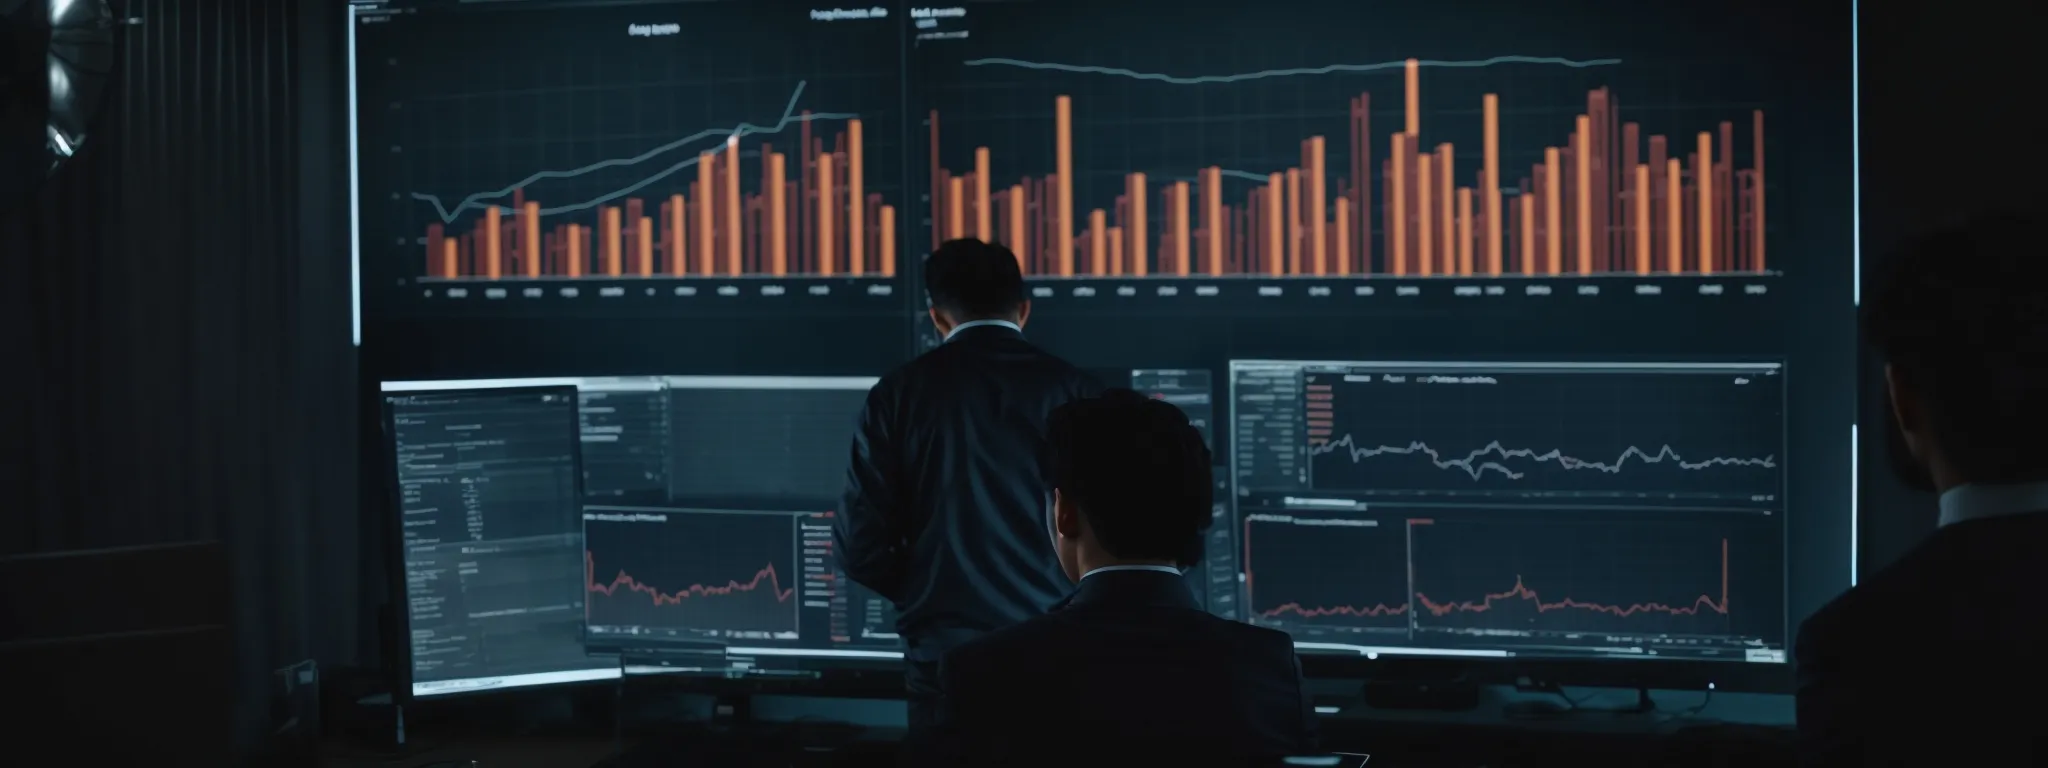 a marketer analyzes charts on a computer screen, reflecting an advanced data analytics dashboard for strategic marketing decisions.